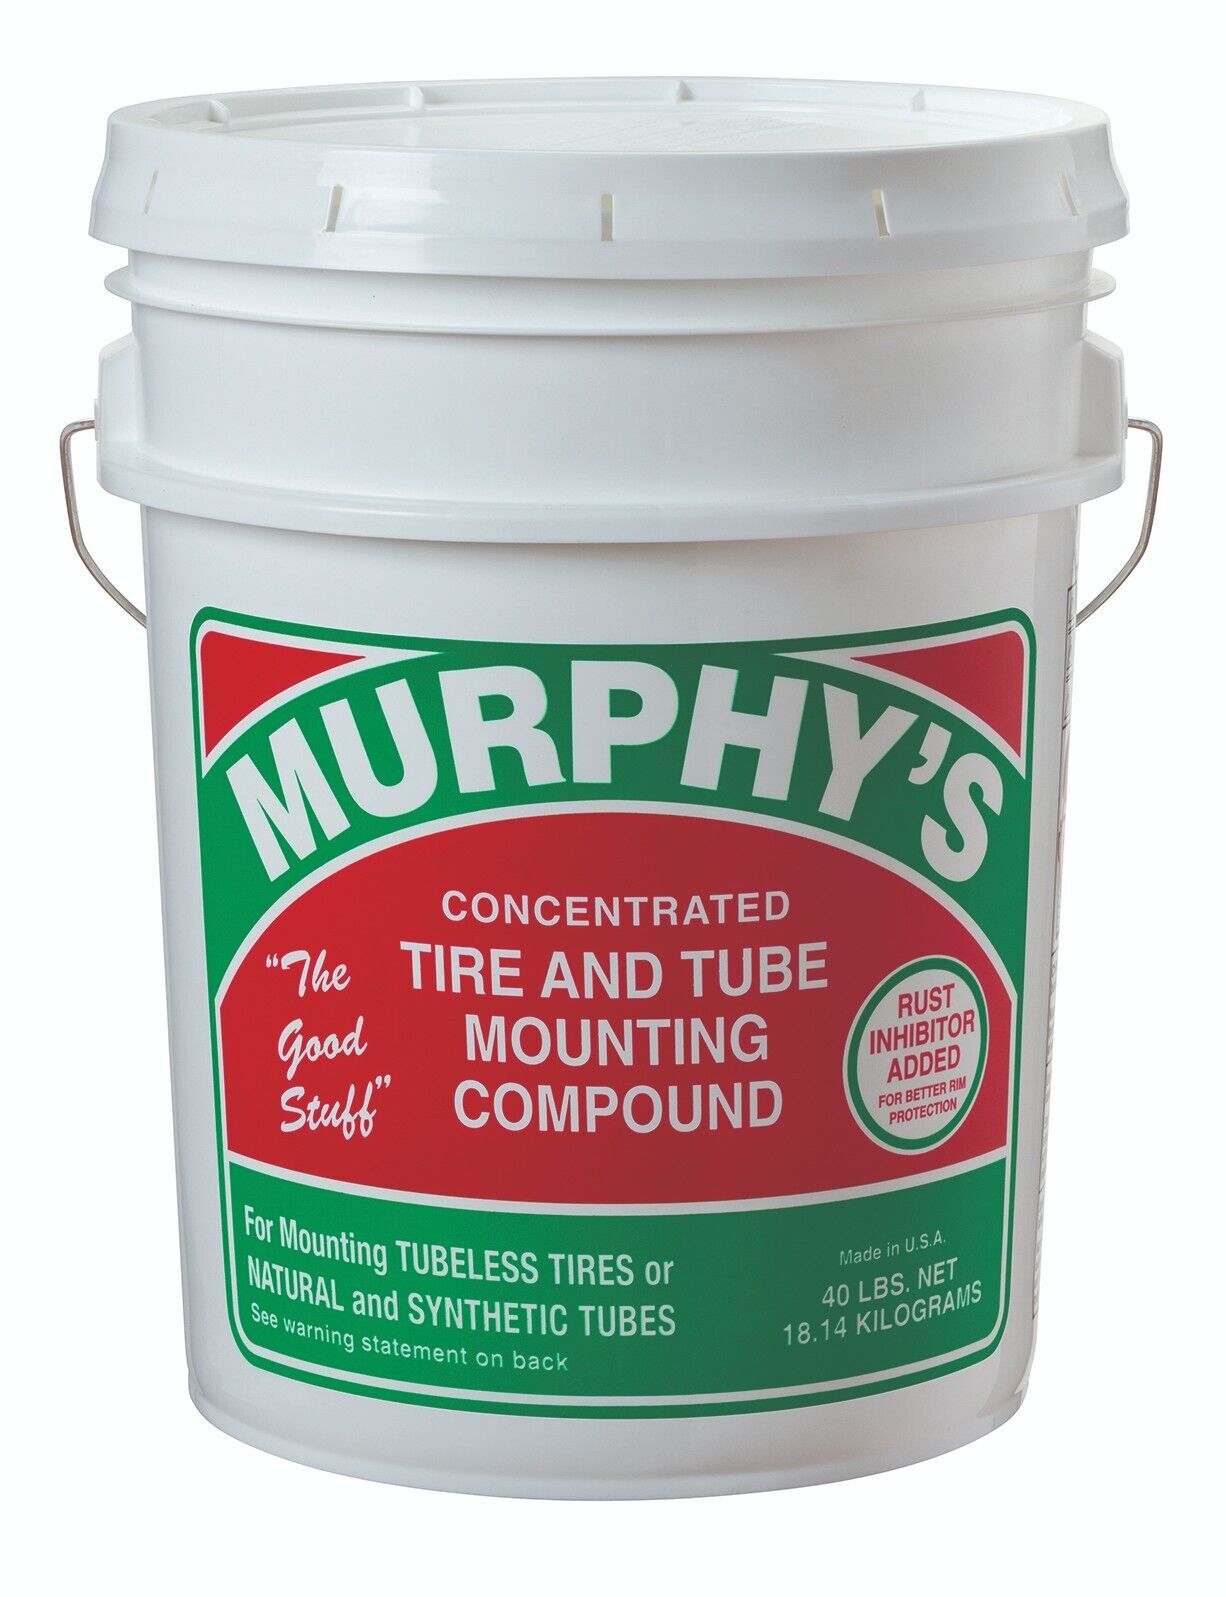 Murphy's Concentrated Tire and Tube Mounting Compound, 40lb Pail